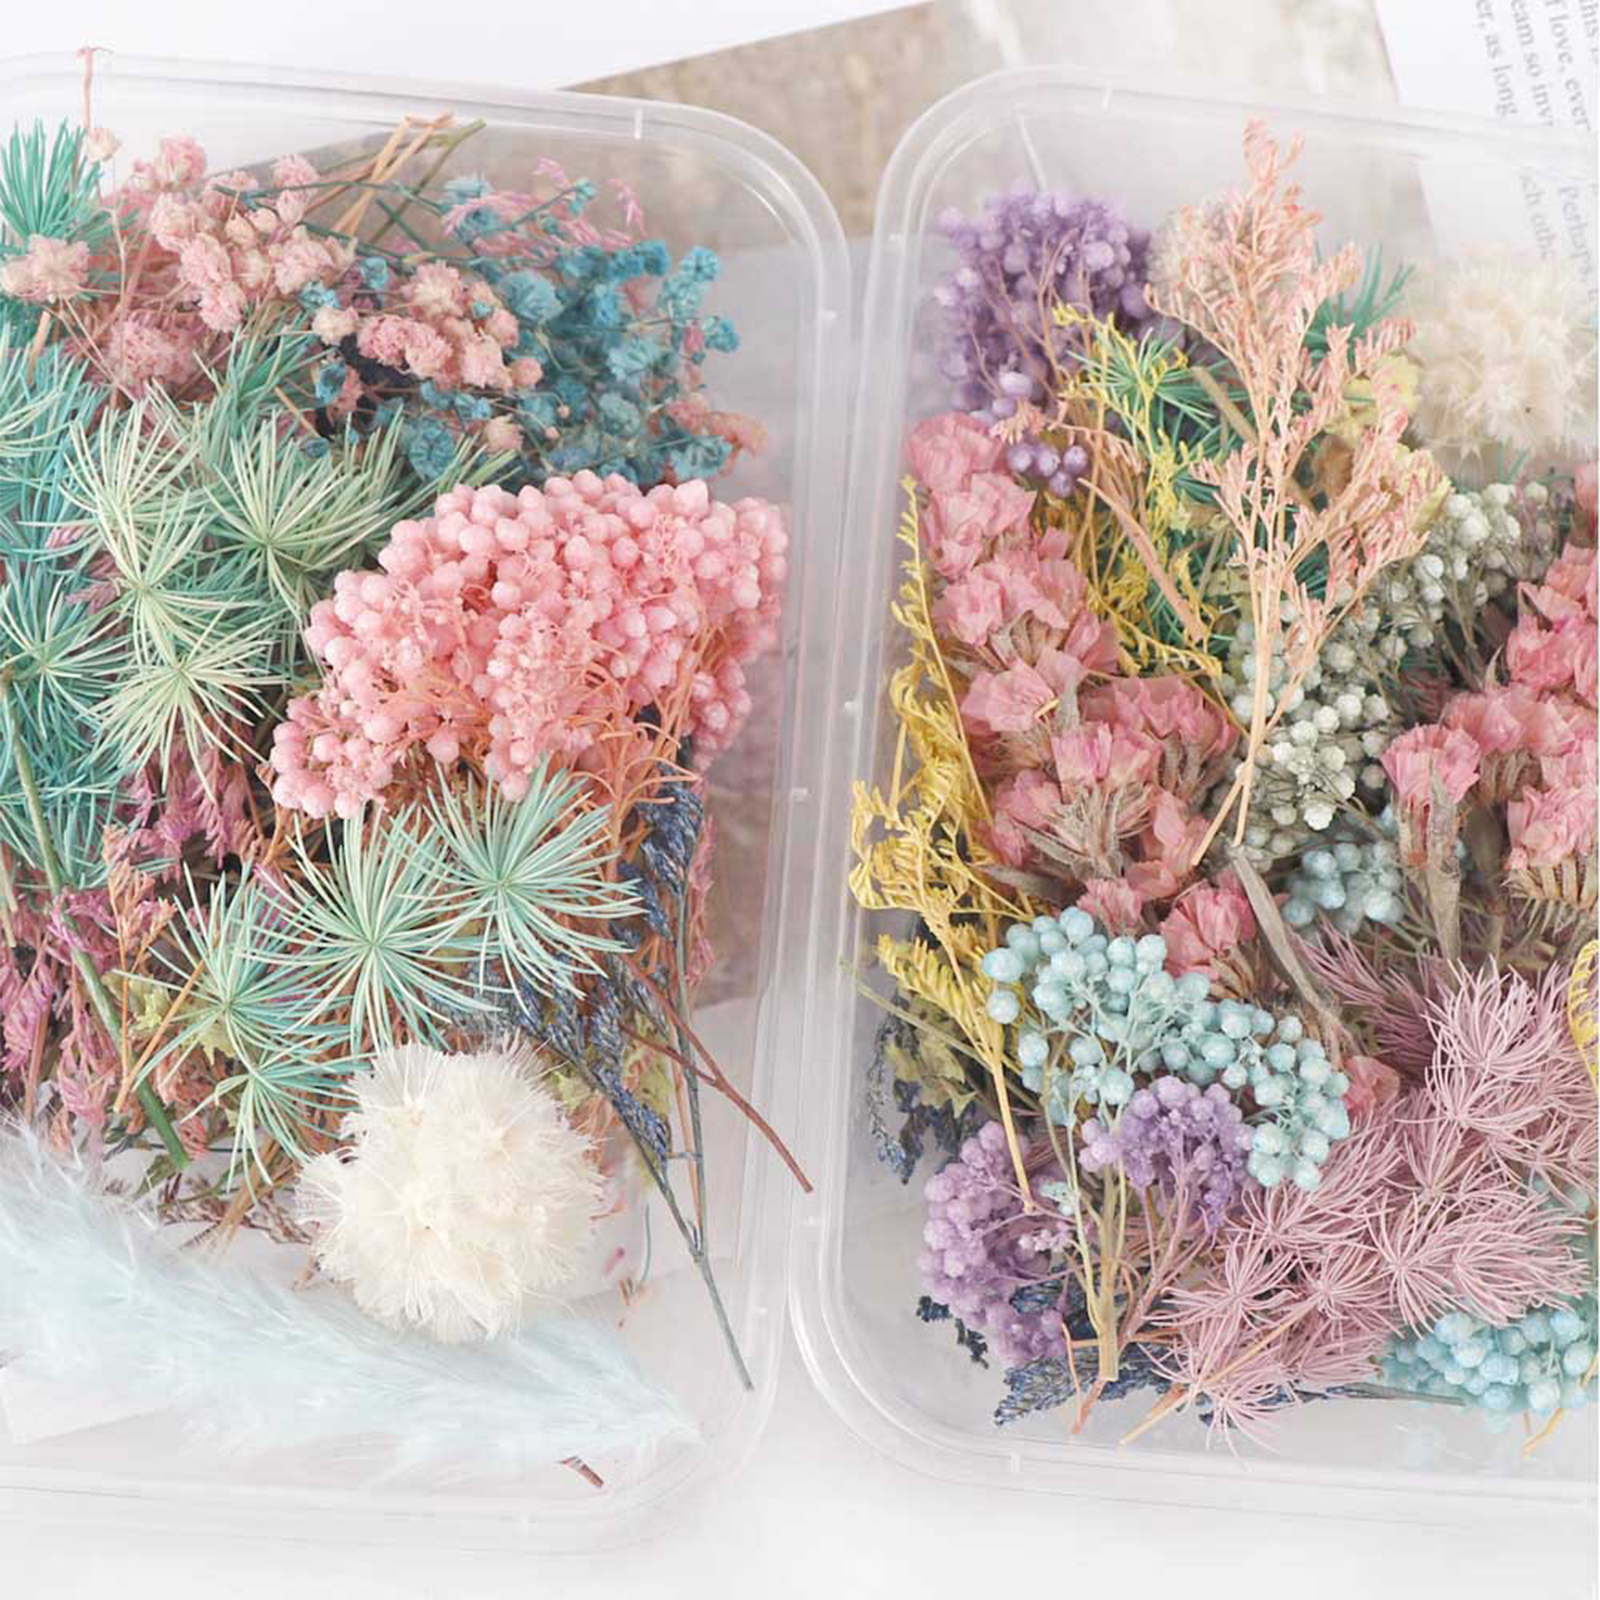 Picture of Real Dried Flower Resin Jewelry Craft Filling Material At Random Color 17cm x 12cm, 1 Box